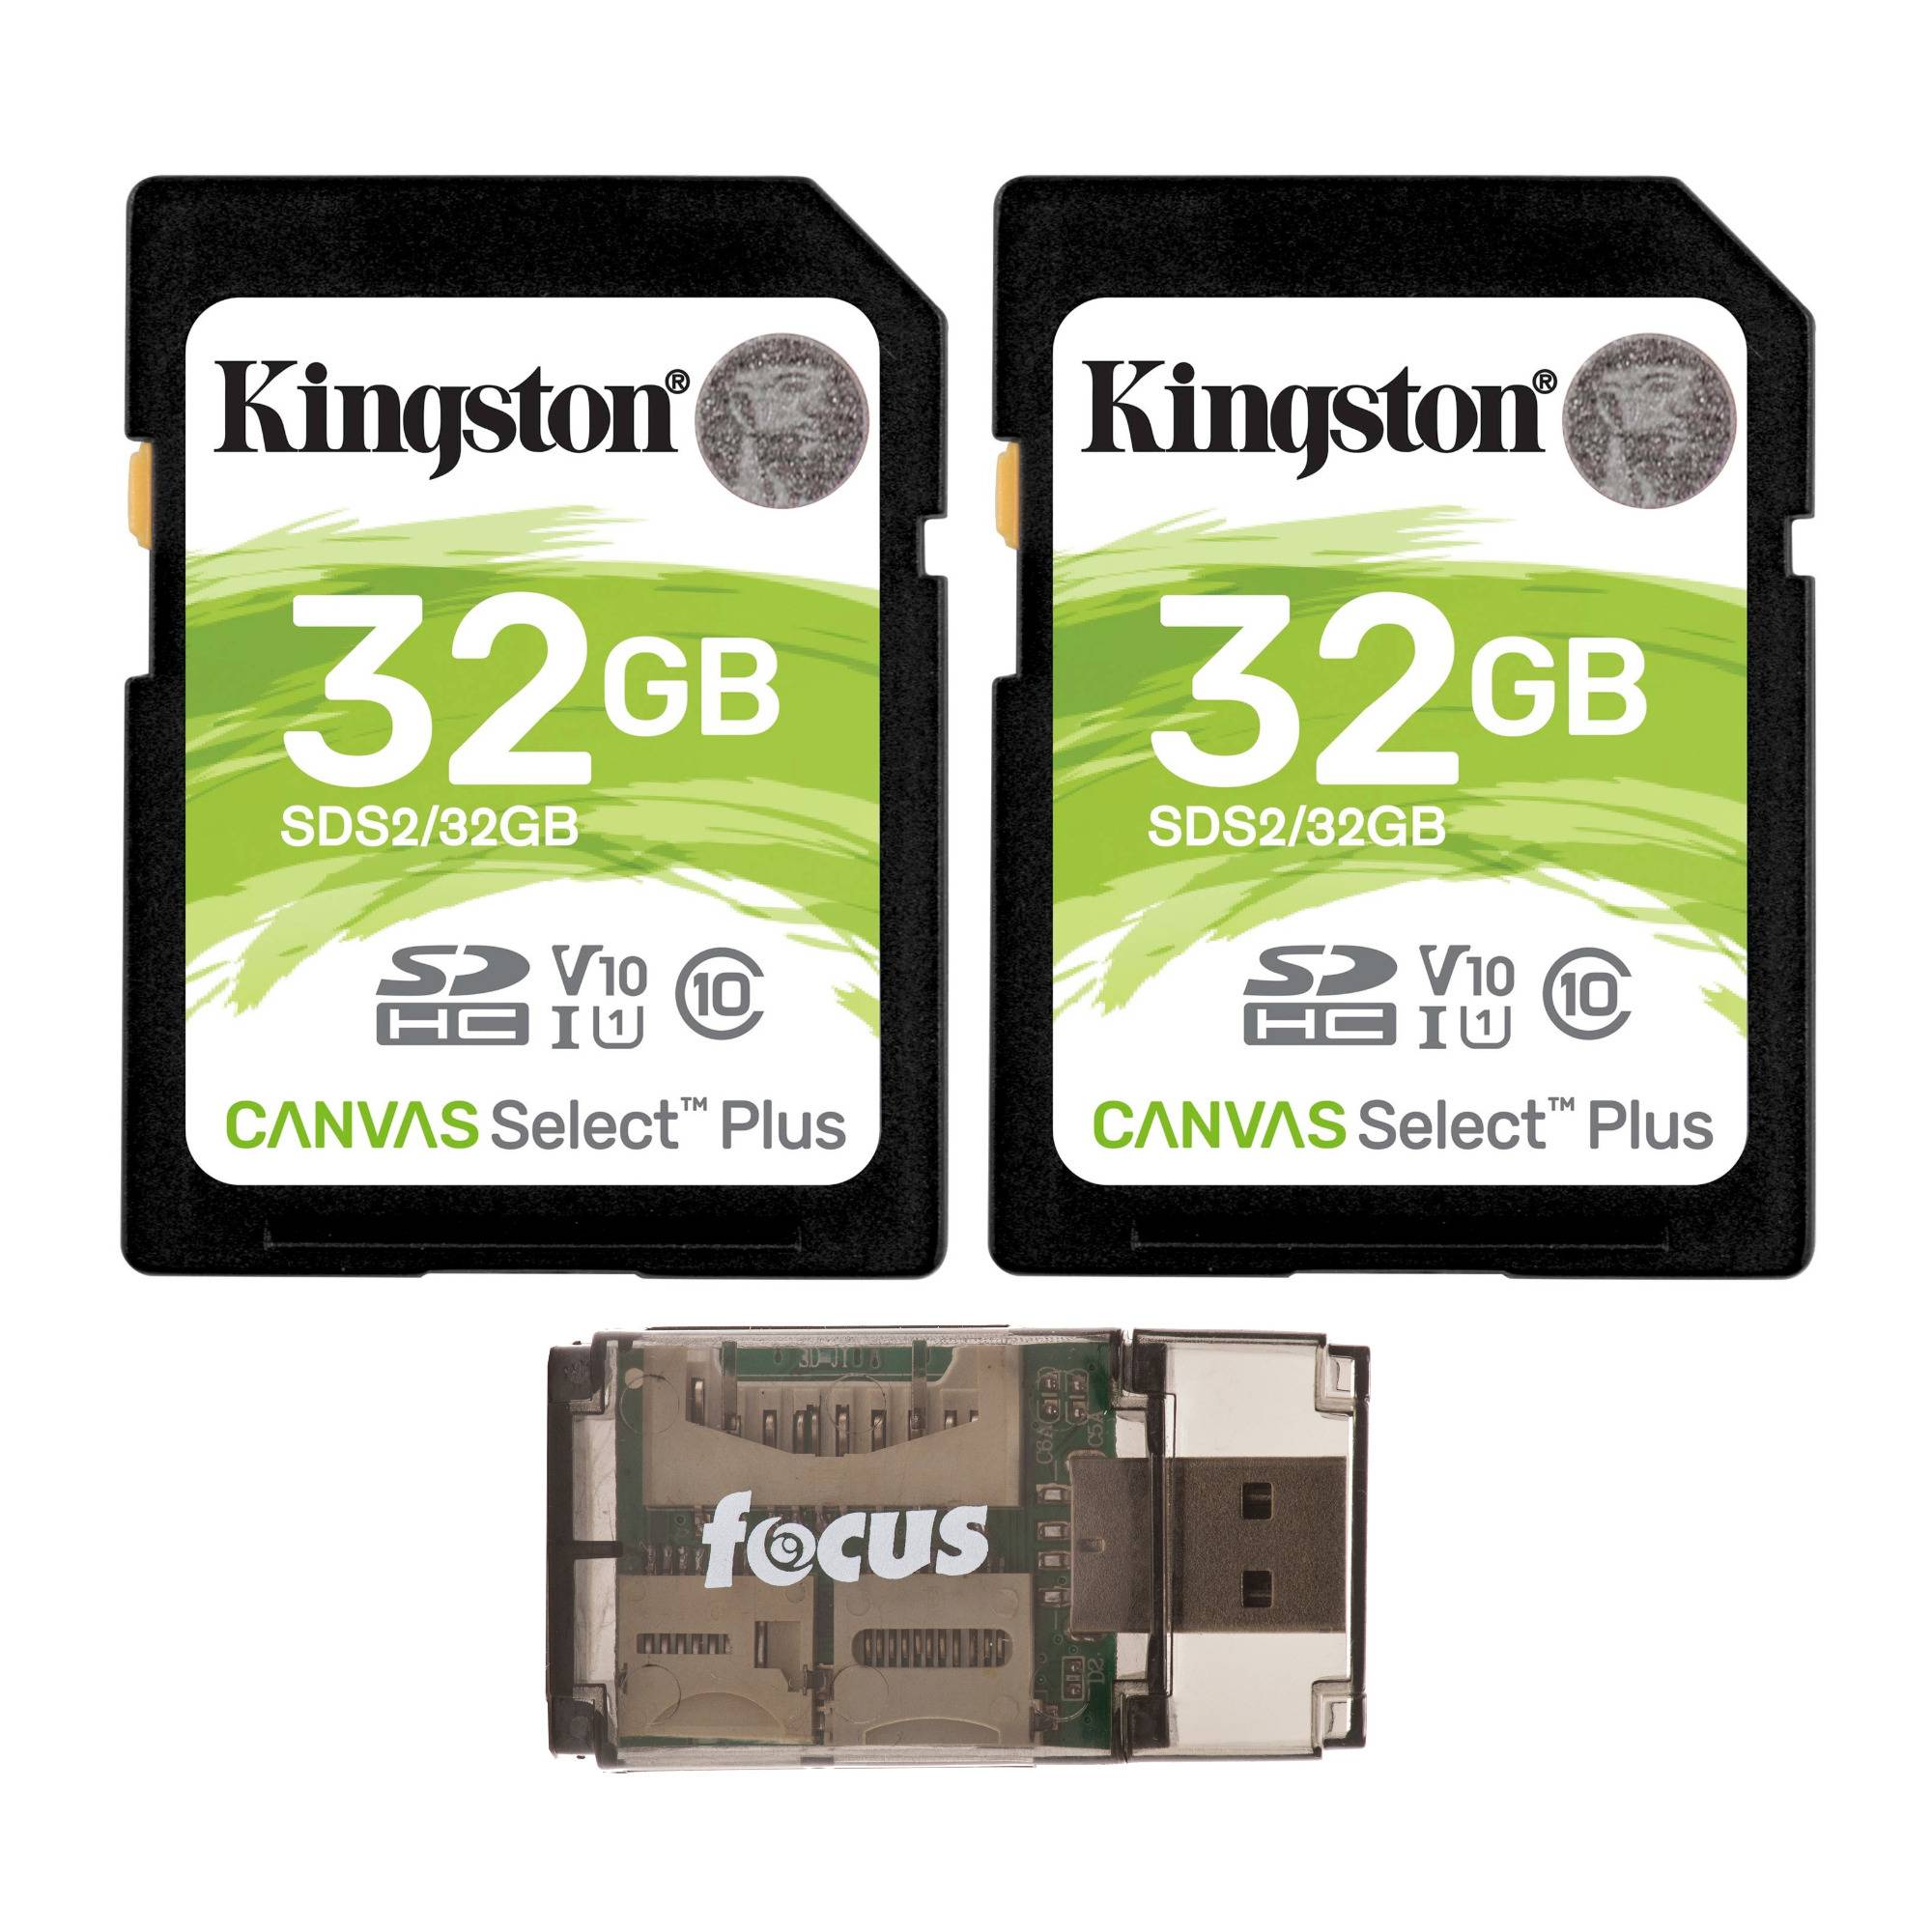 Kingston 32GB SDHC Canvas Select Class 10 UHS-1 (SDS/32GB) Memory Card (2-Pack) with Card Reader